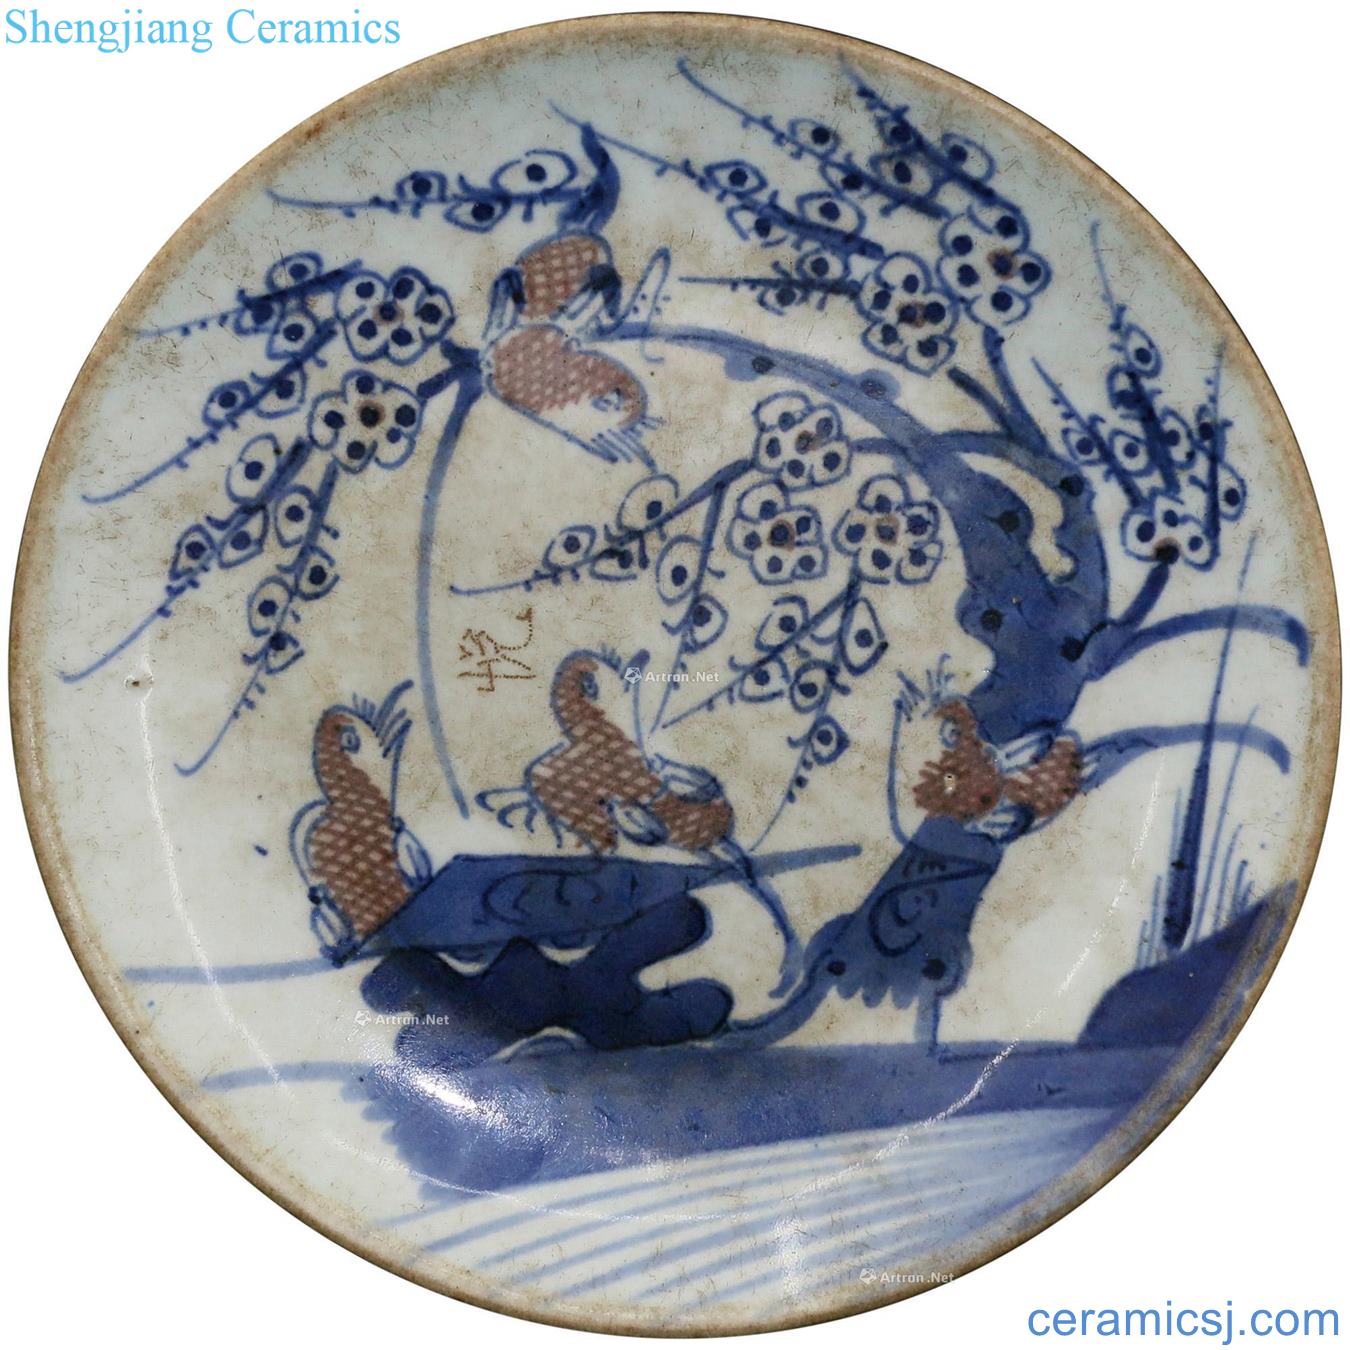 The song dynasty Blue and white youligong magpie on MeiPan